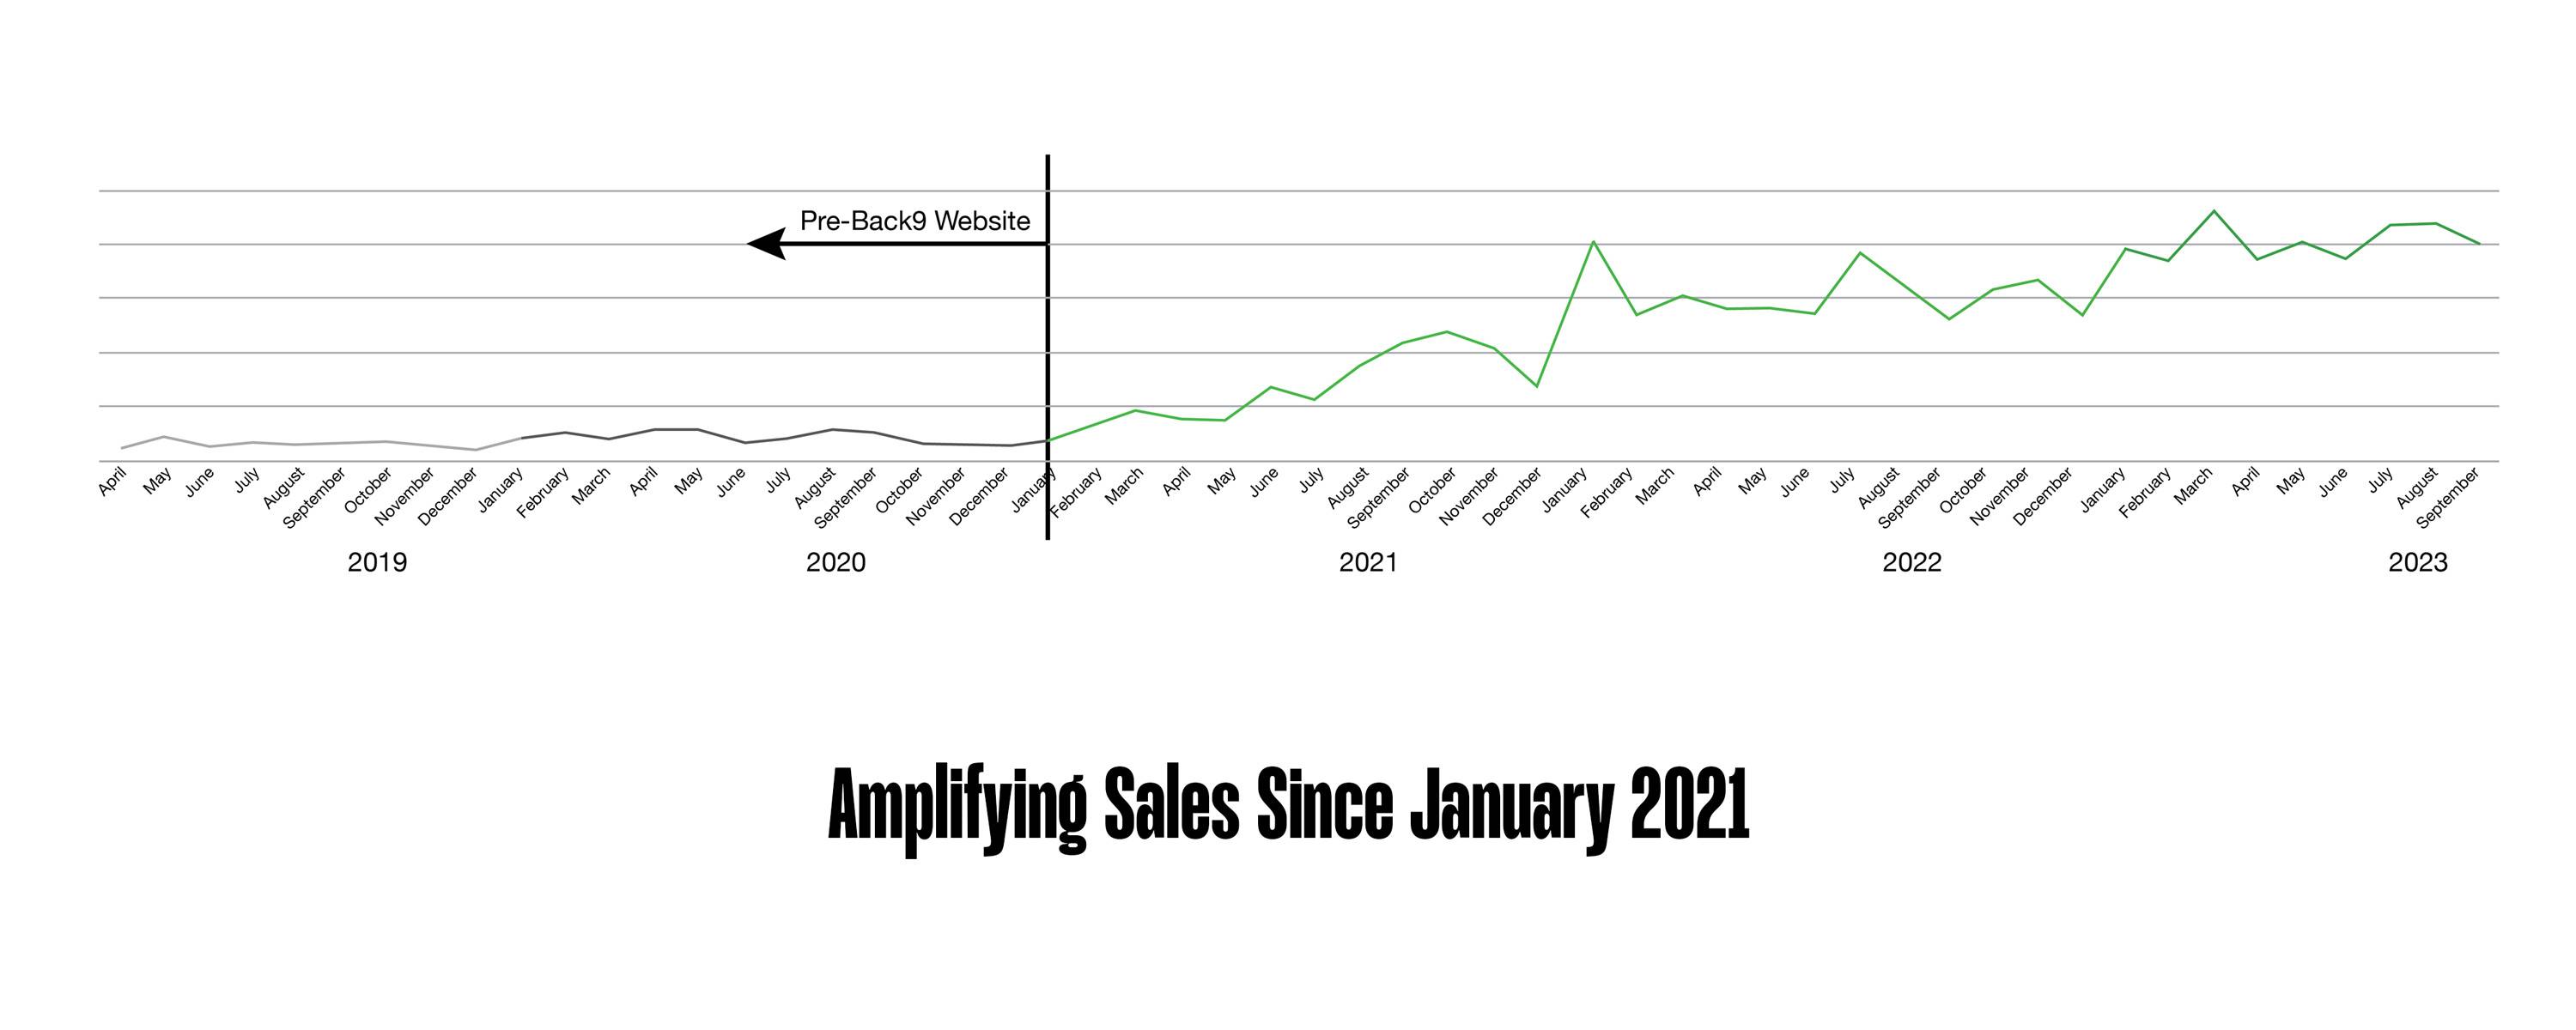 Safety 1st NZ graph of sales increase for ecommerce website by back9 creative